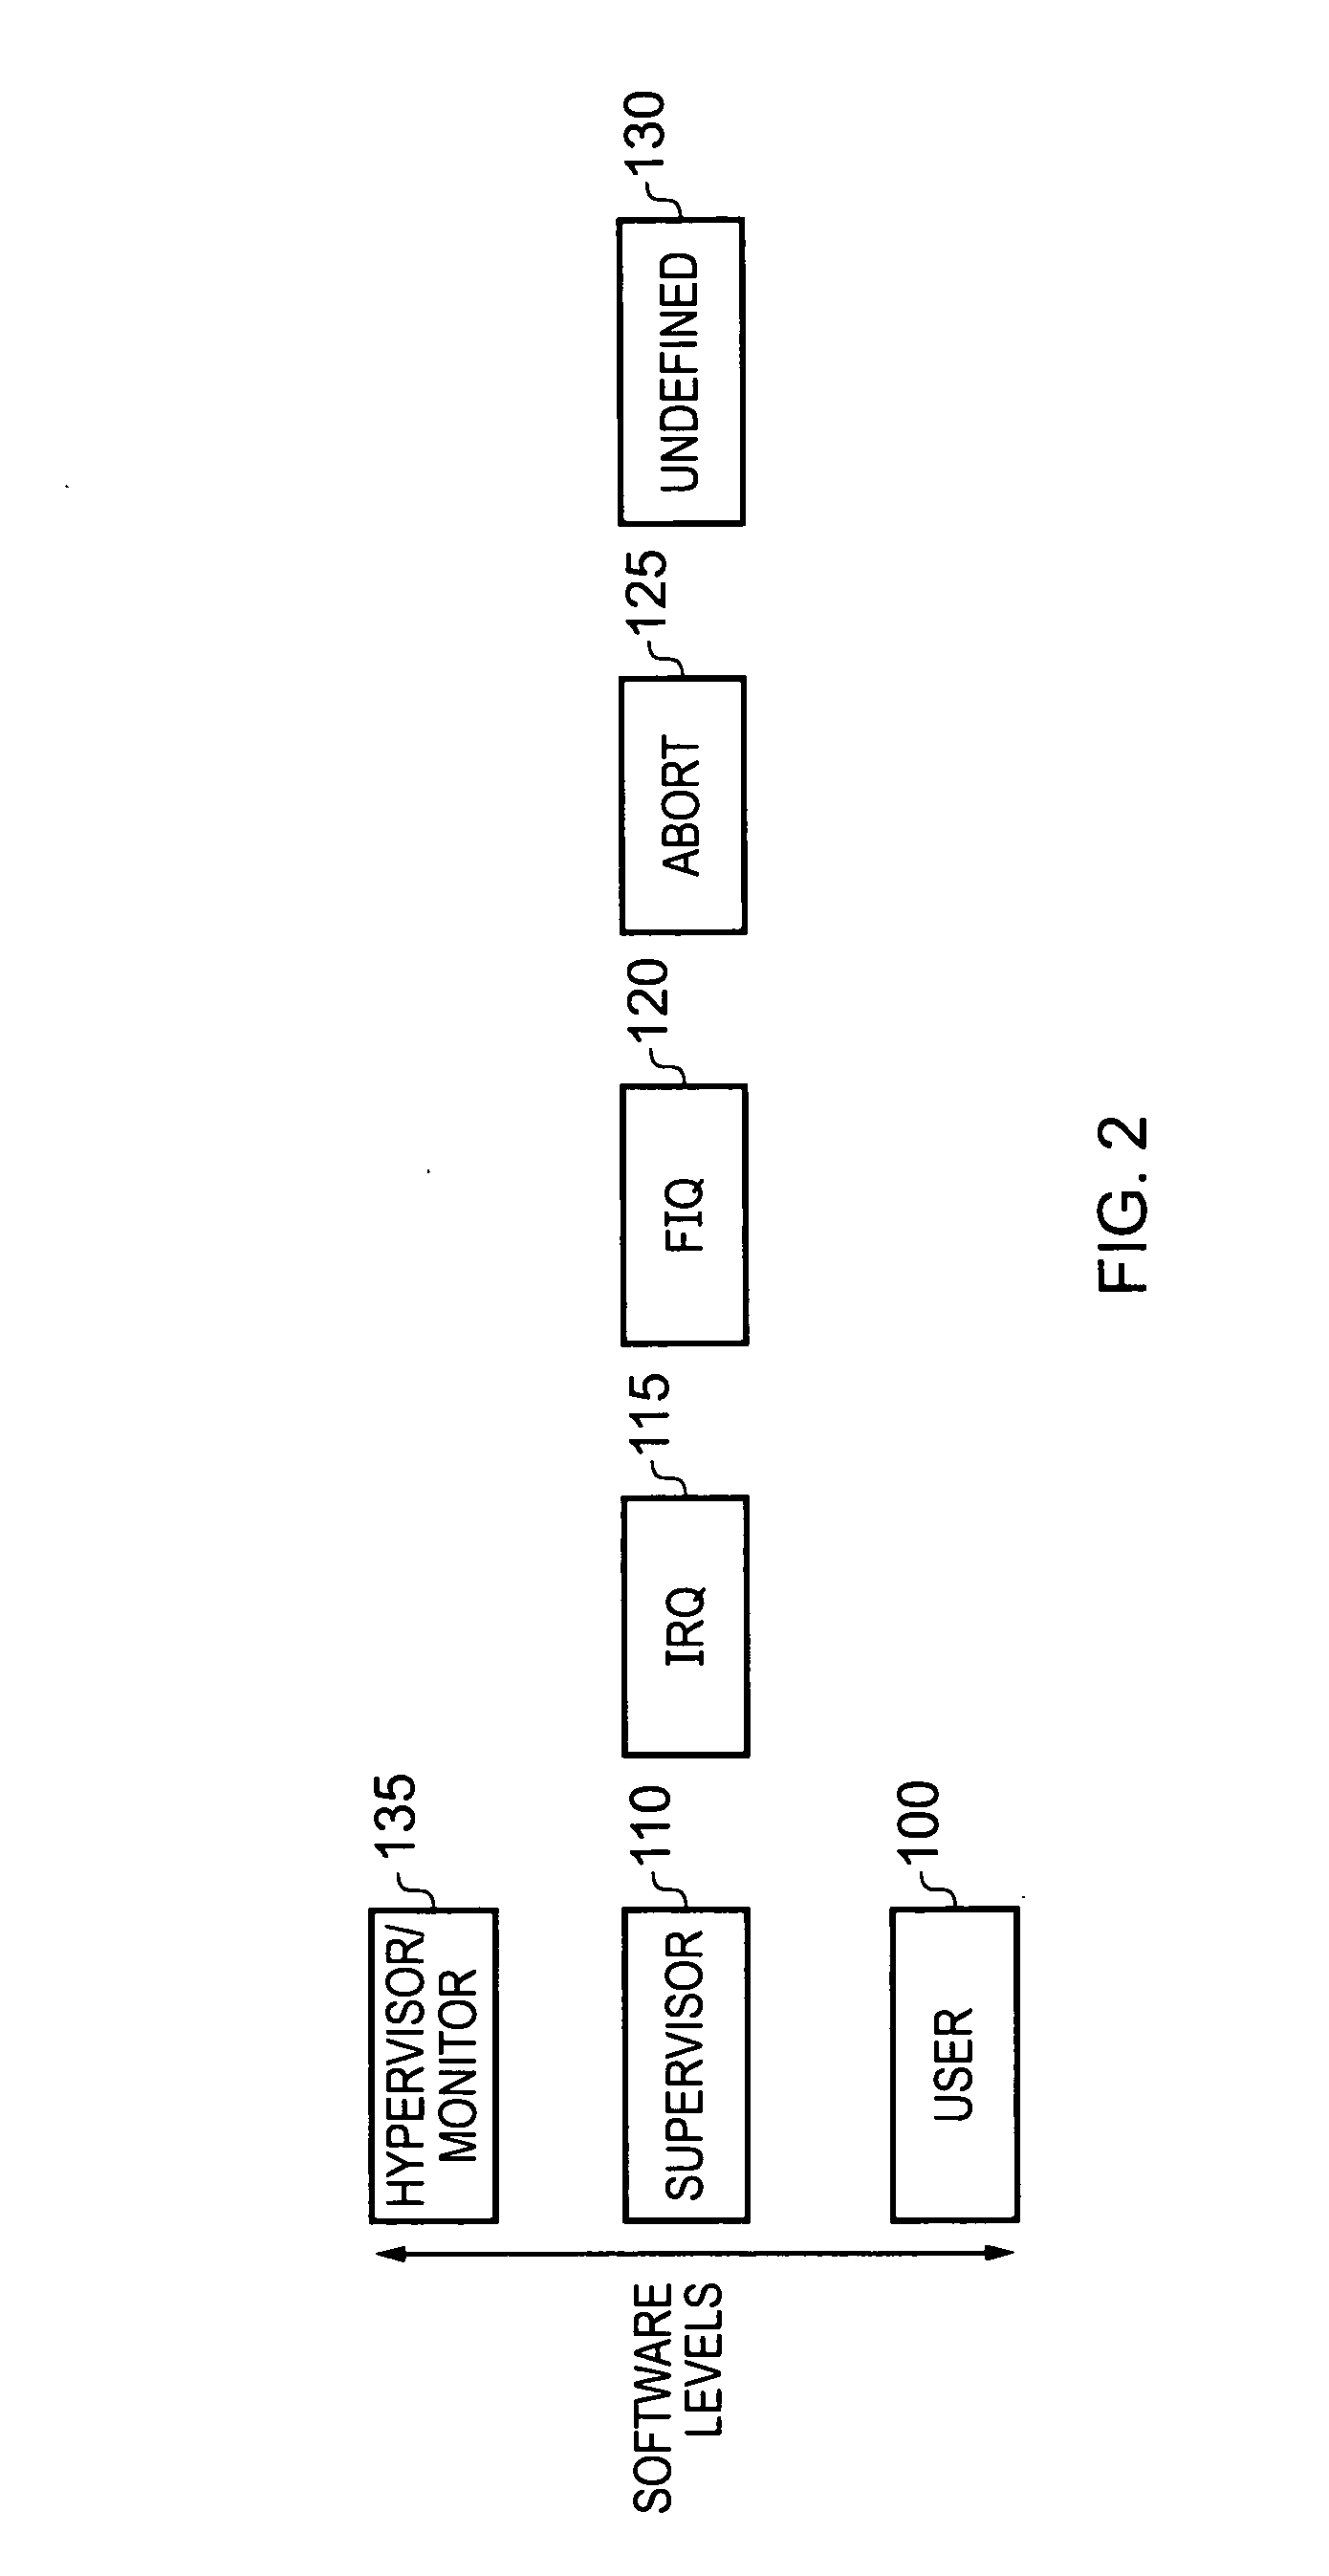 Apparatus and method for mapping architectural registers to physical registers